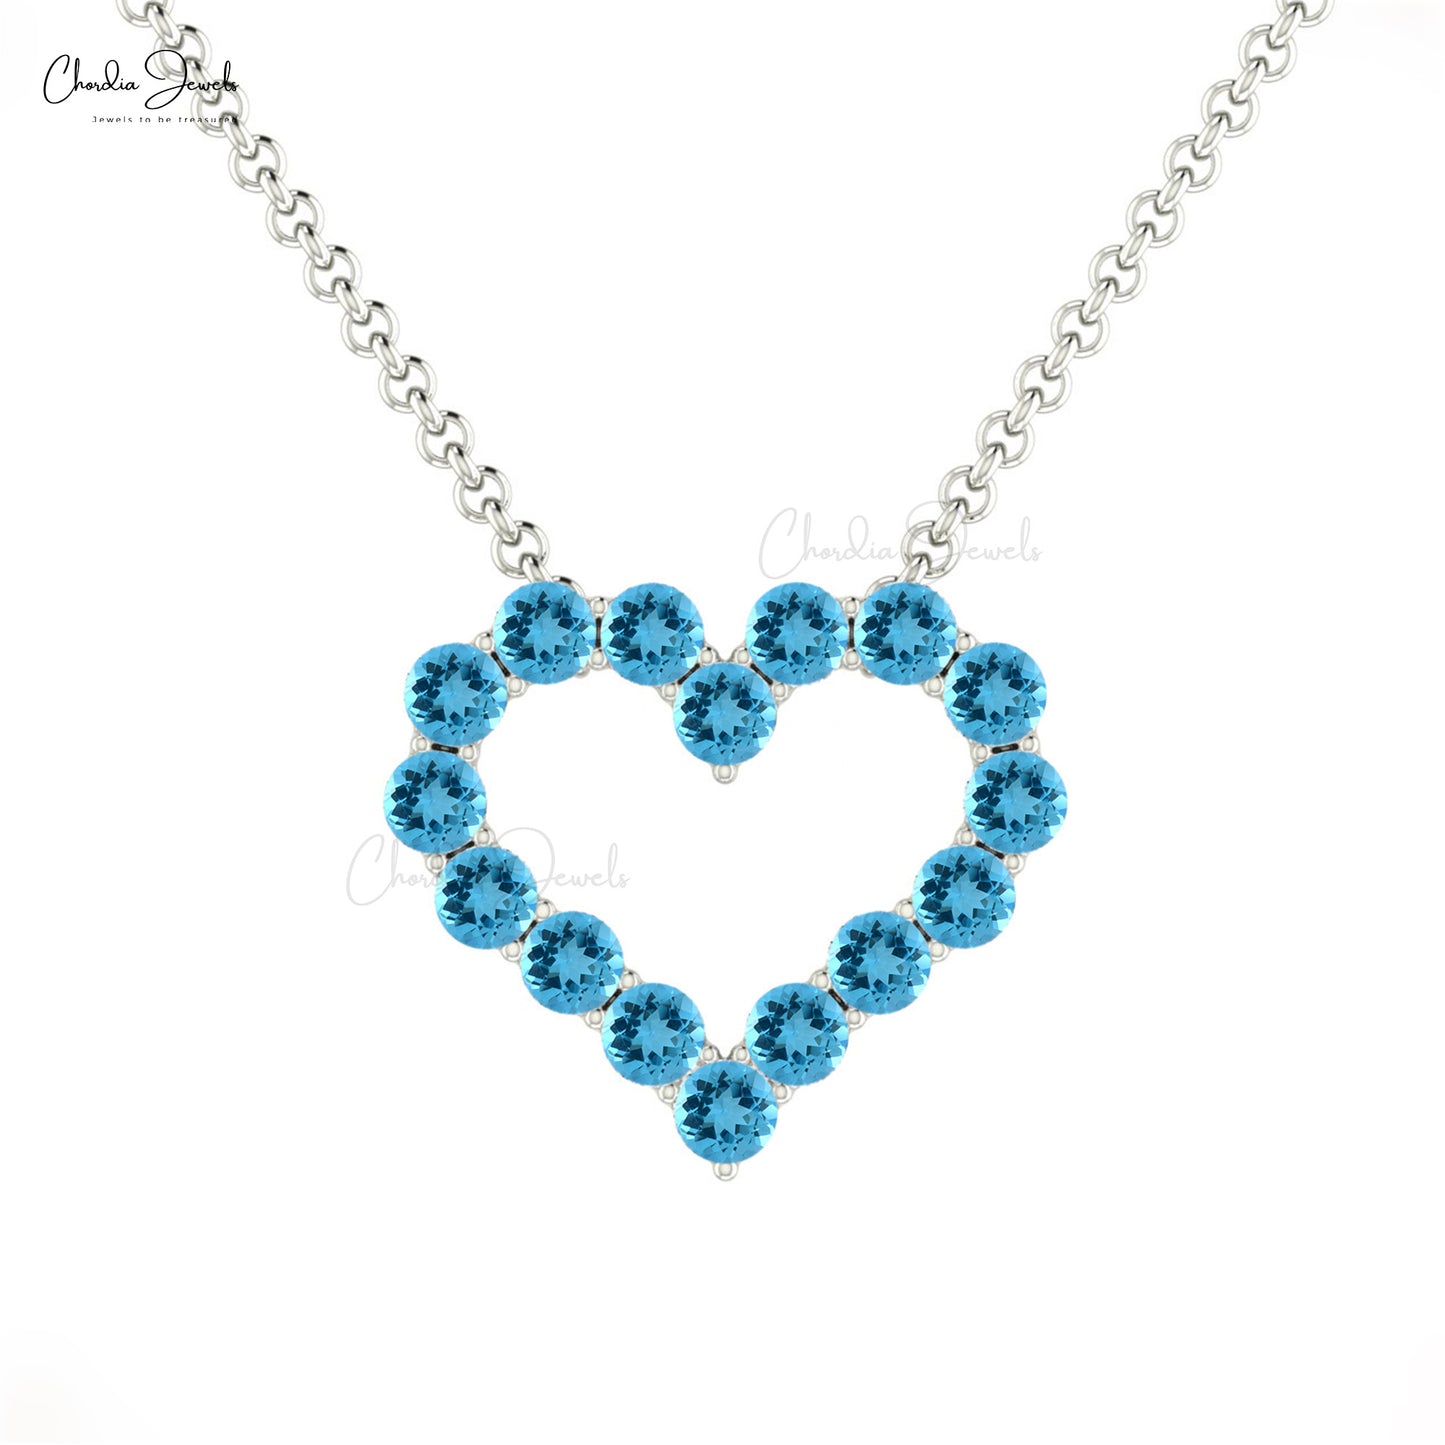 Load image into Gallery viewer, Trendy Round Gemstone Necklace in 14k Solid Gold Genuine Swiss Blue Topaz Heart Shape Necklace Pendant Bridesmaid Gift
